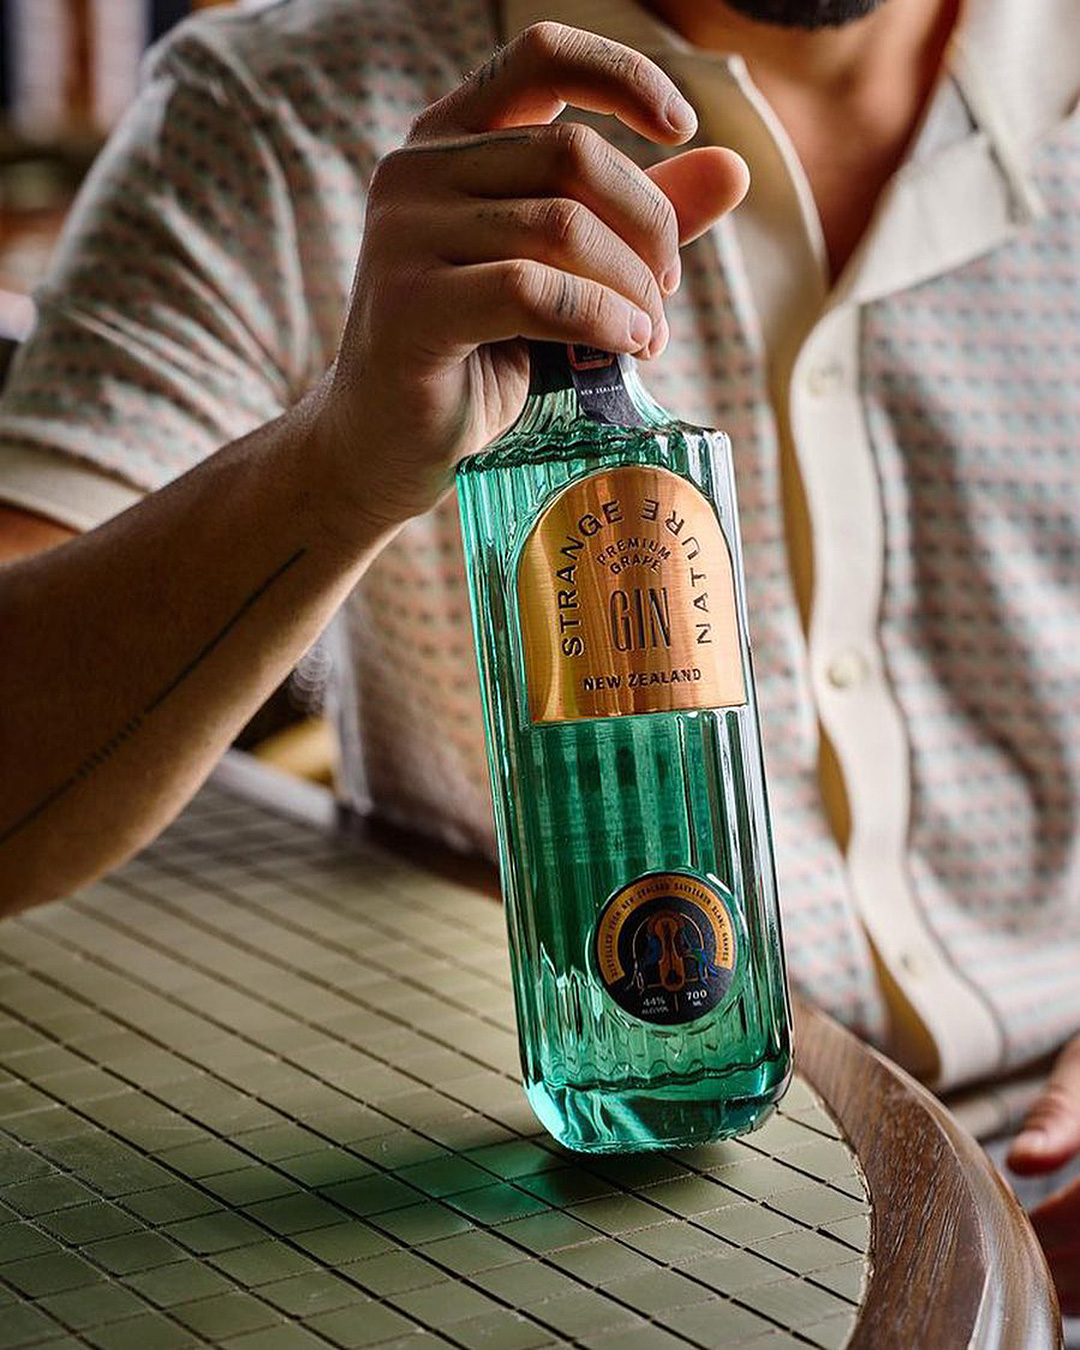 Someone holds a bottle of Strange Nature Gin, one of the best gins in NZ.